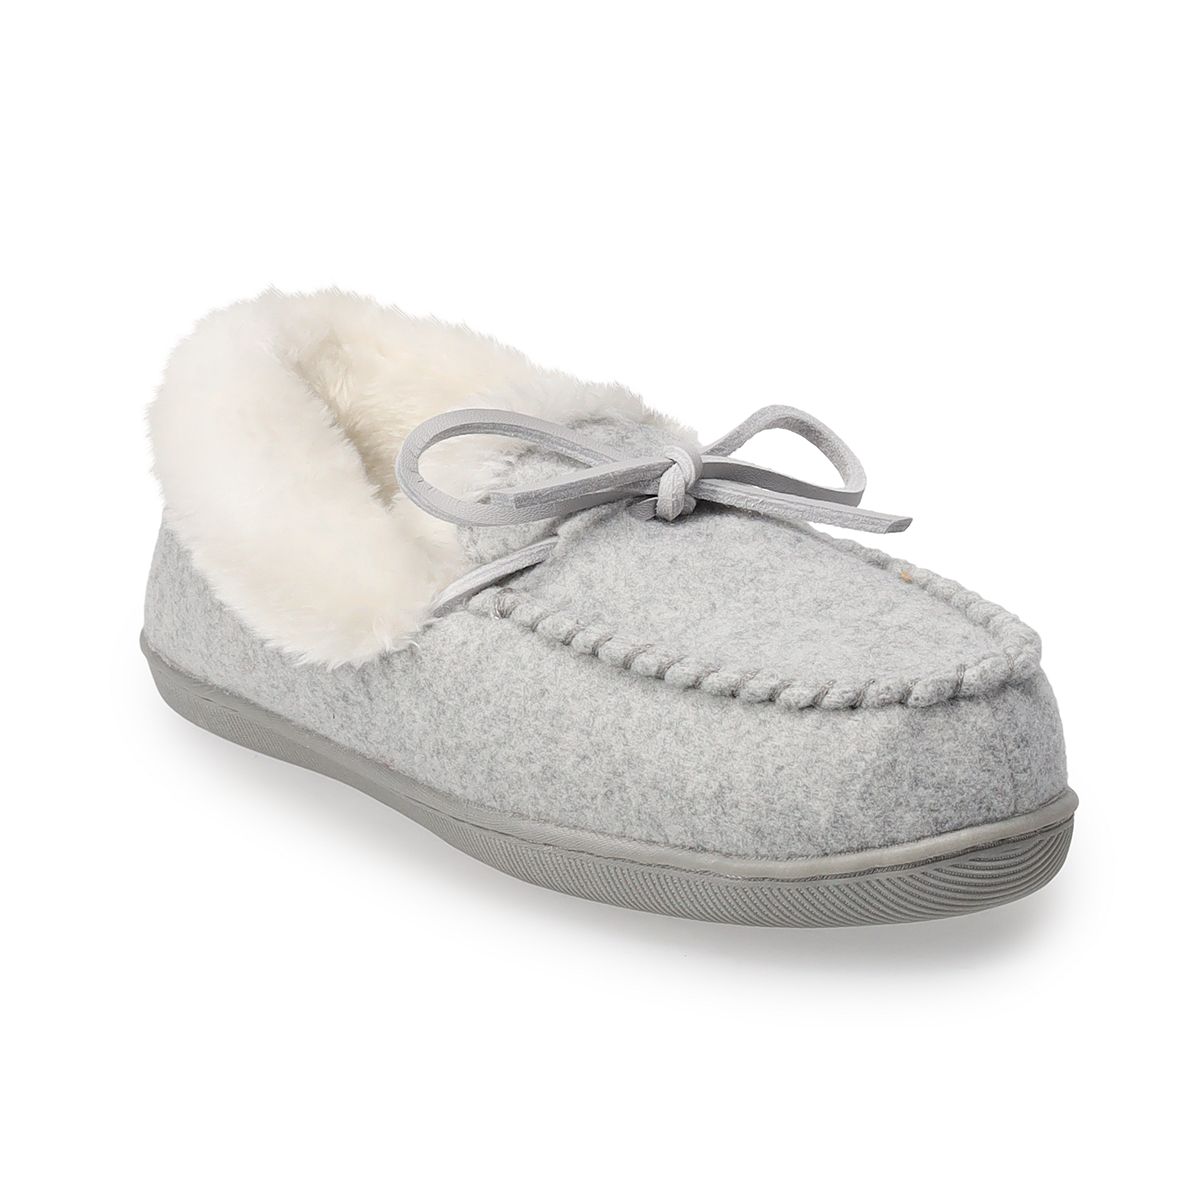 Sonoma Goods For Life® Women's Sweater Knit Moccasin Slippers